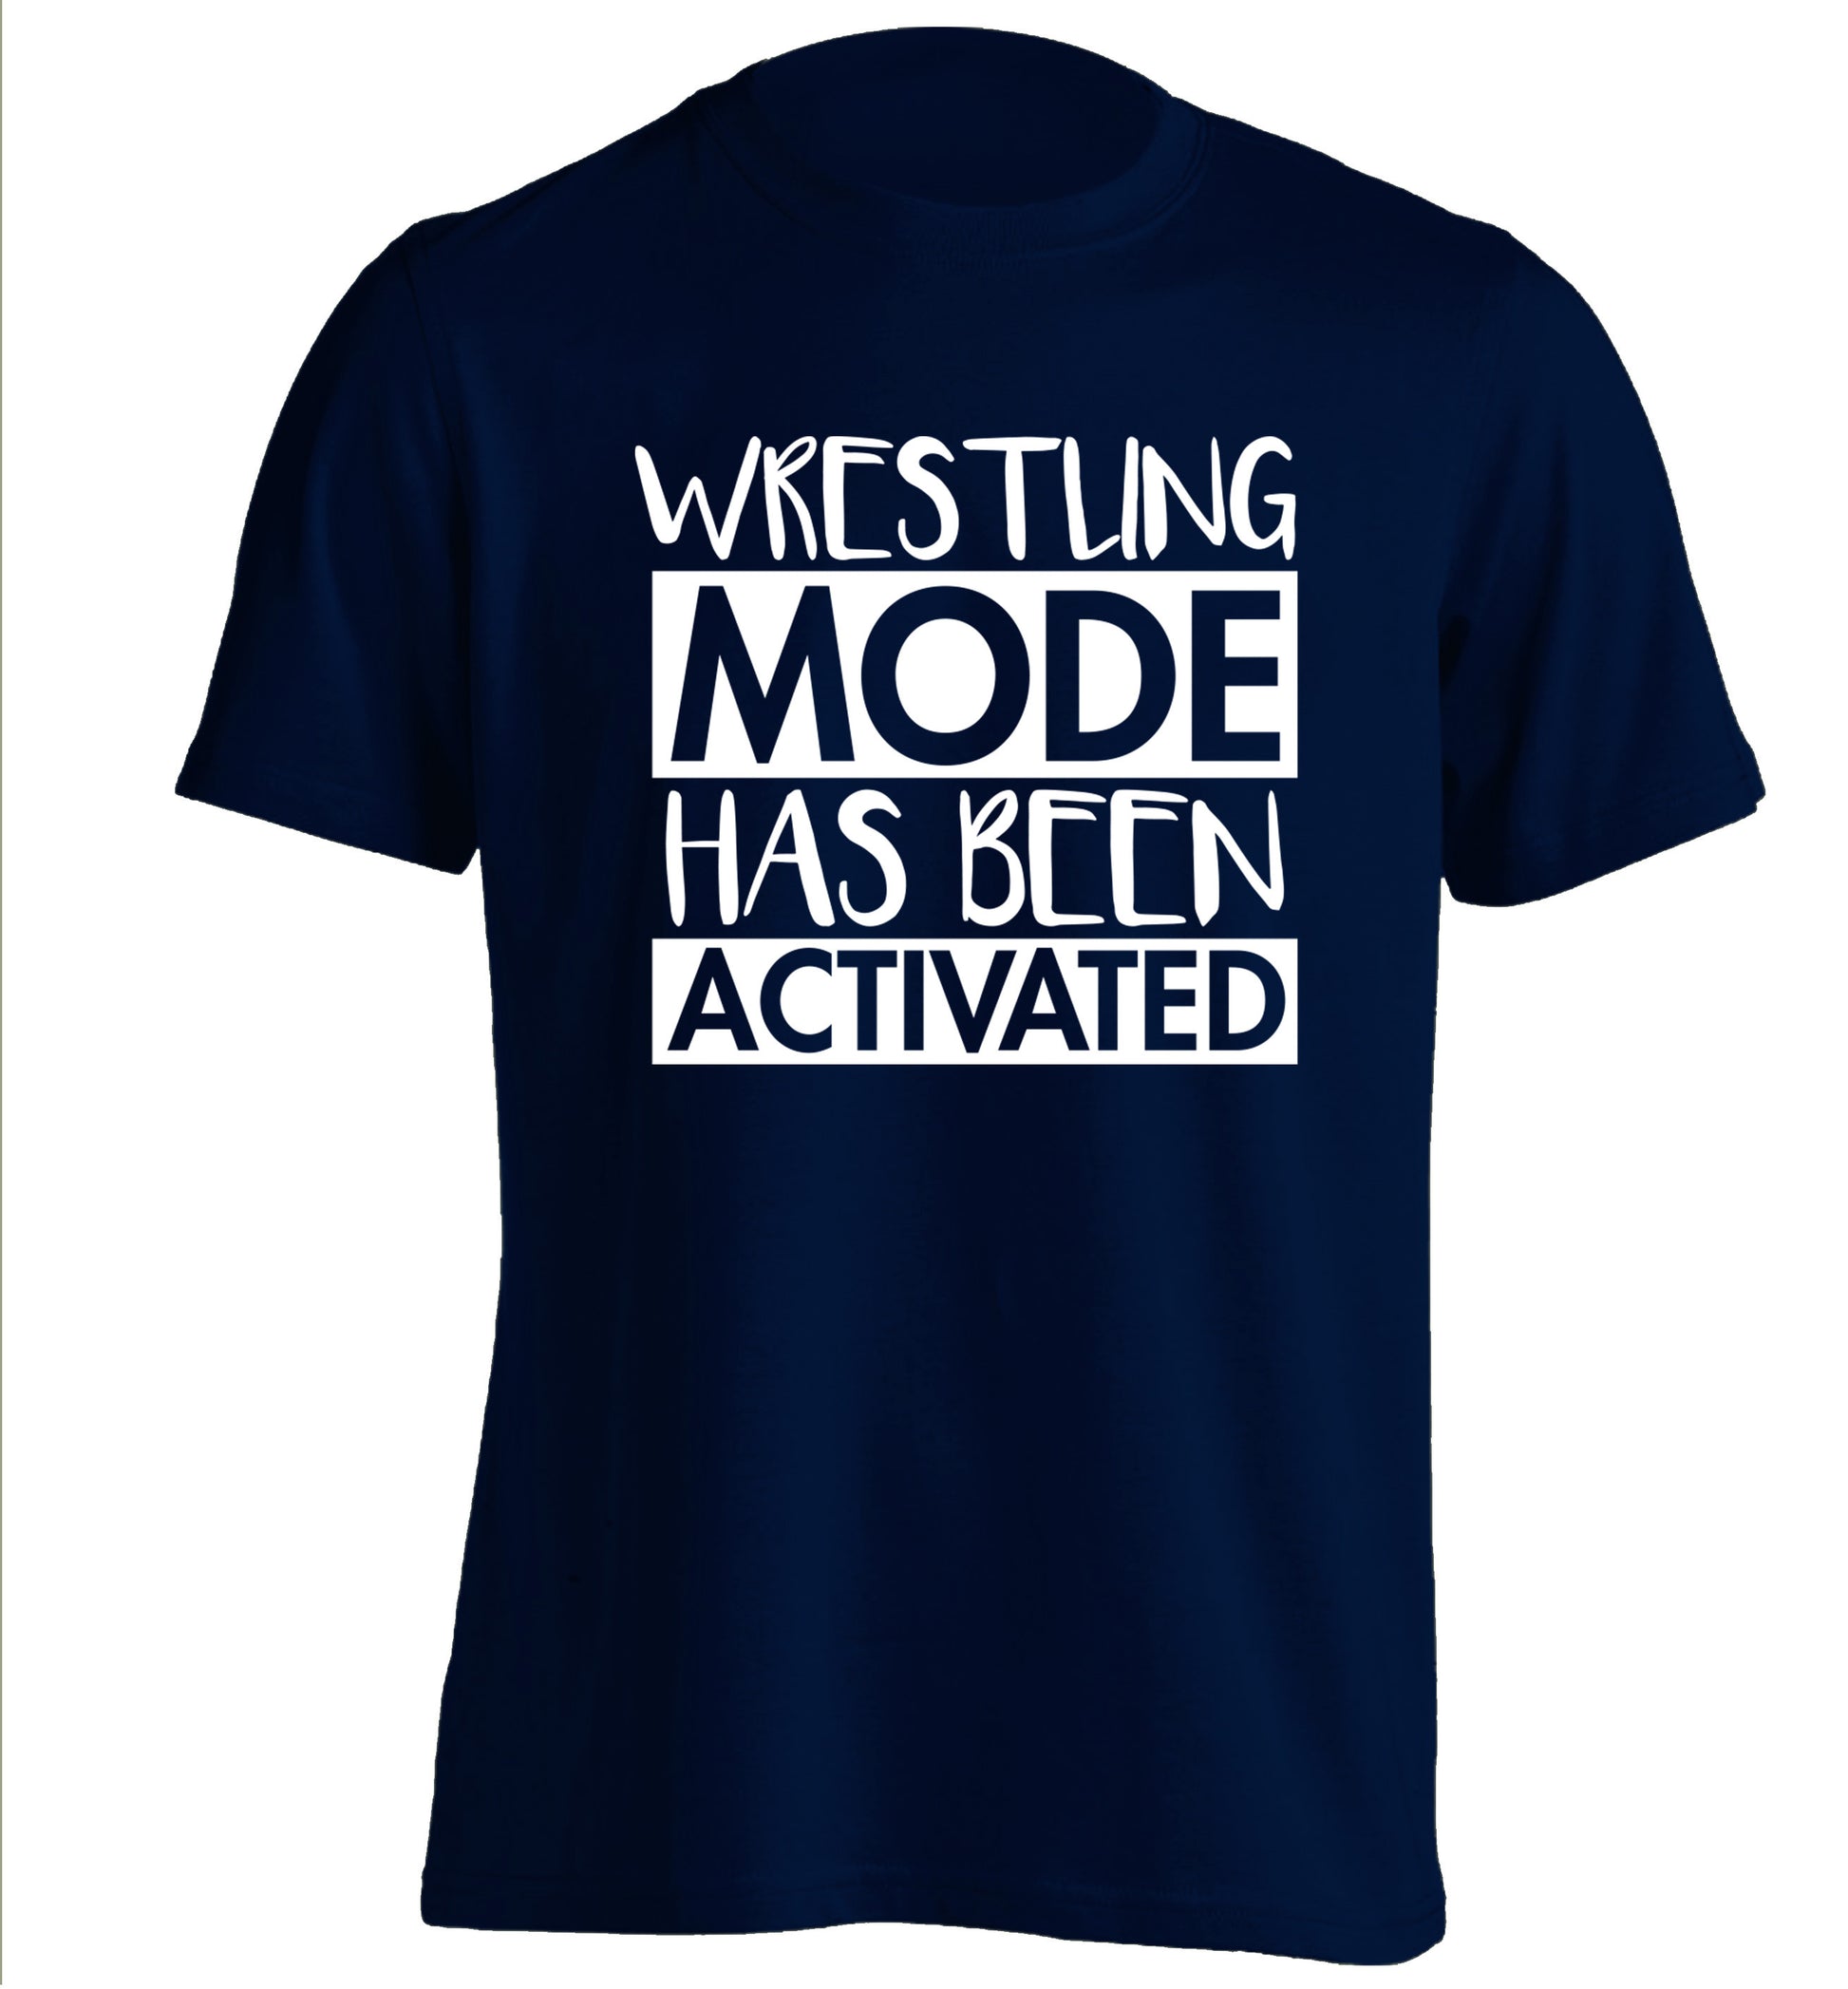 Wresting mode activated adults unisex navy Tshirt 2XL